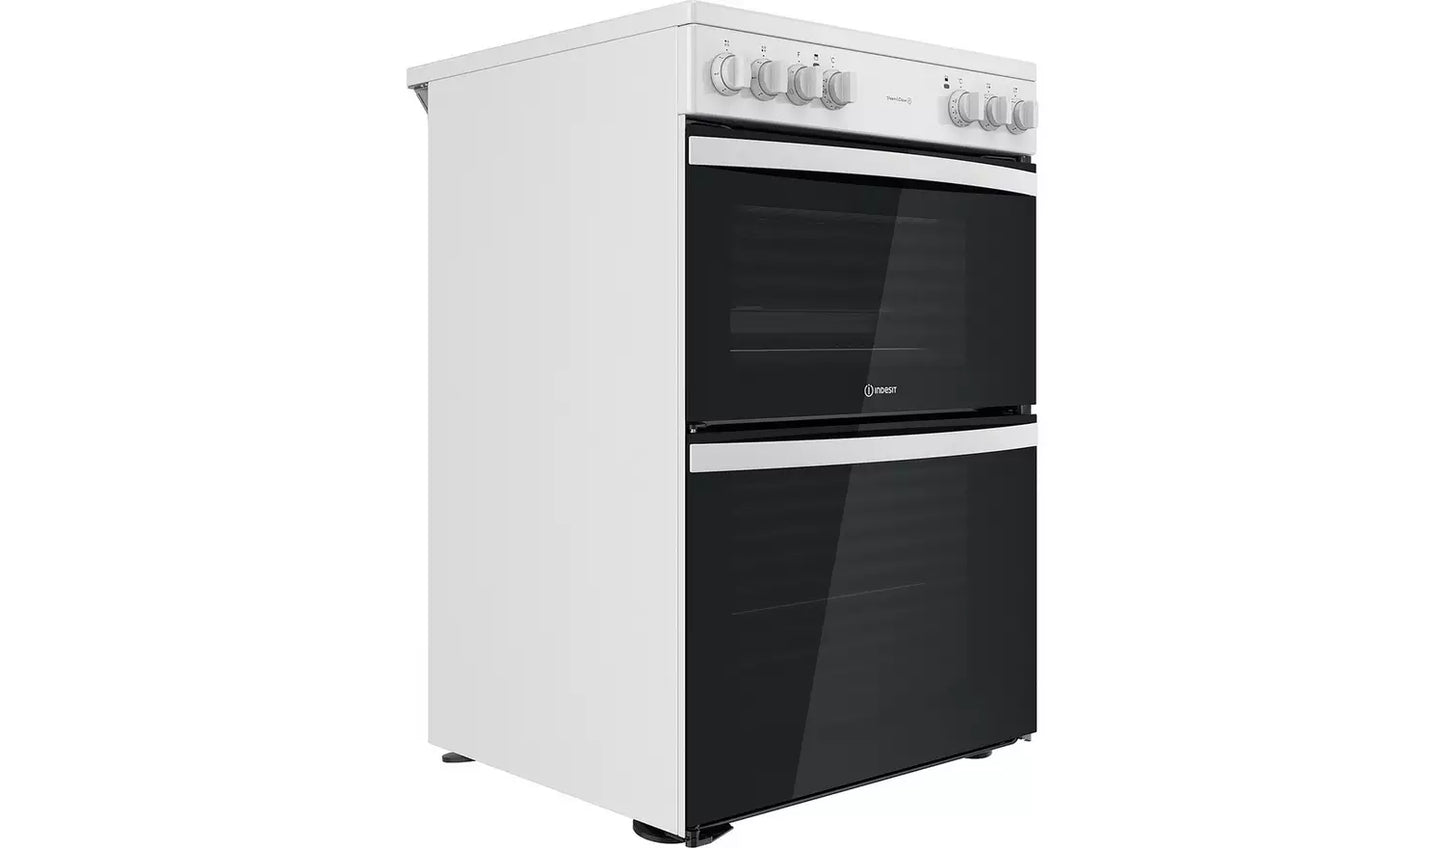 Indesit 60Cm Double Oven Electric Cooker In White - ID67V9KMWUK